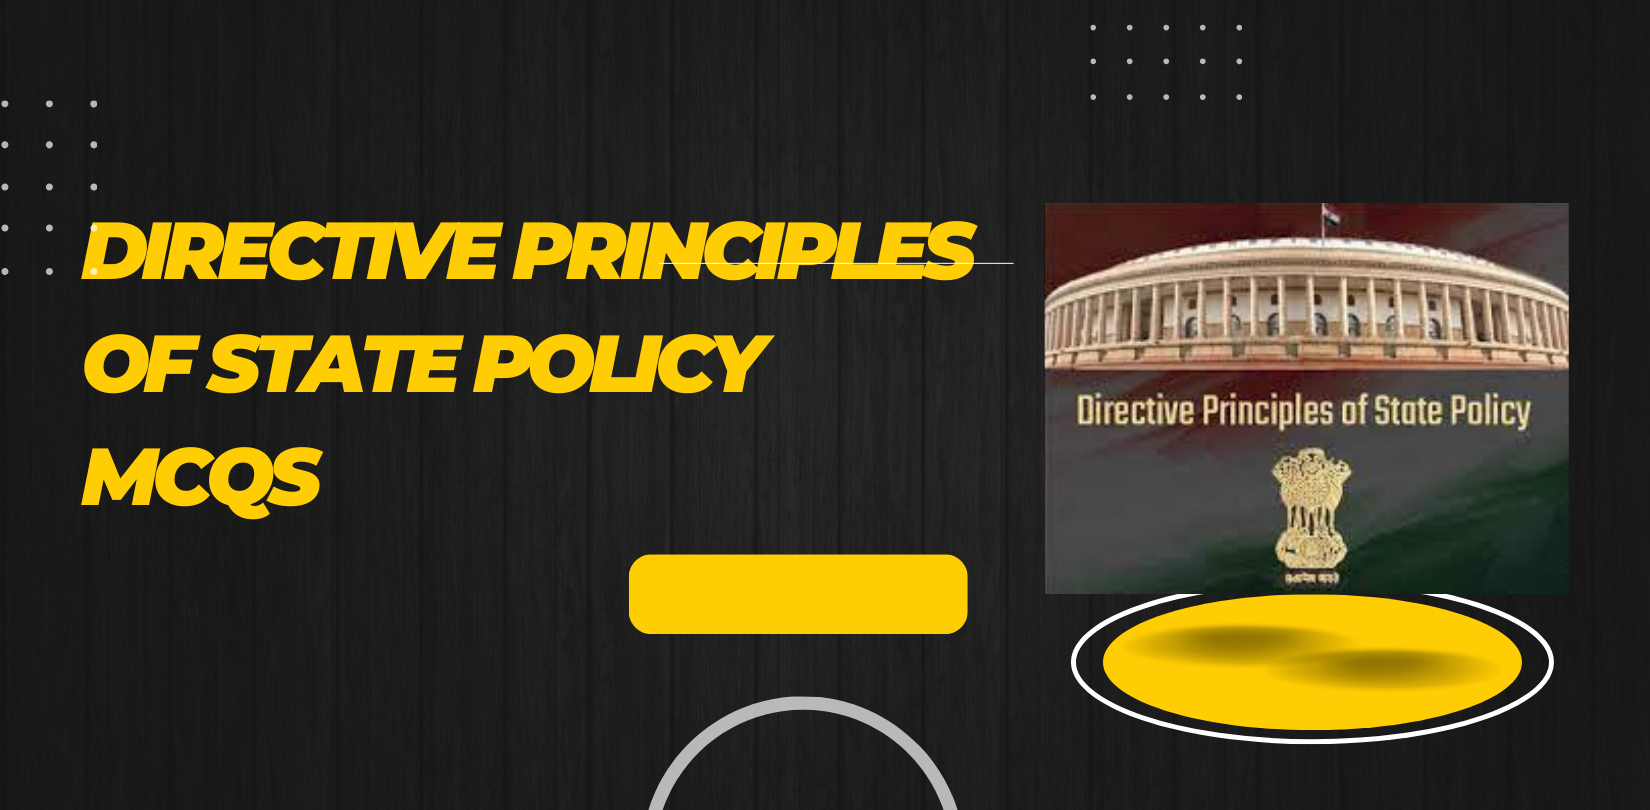 Directive Principles of State Policy MCQs